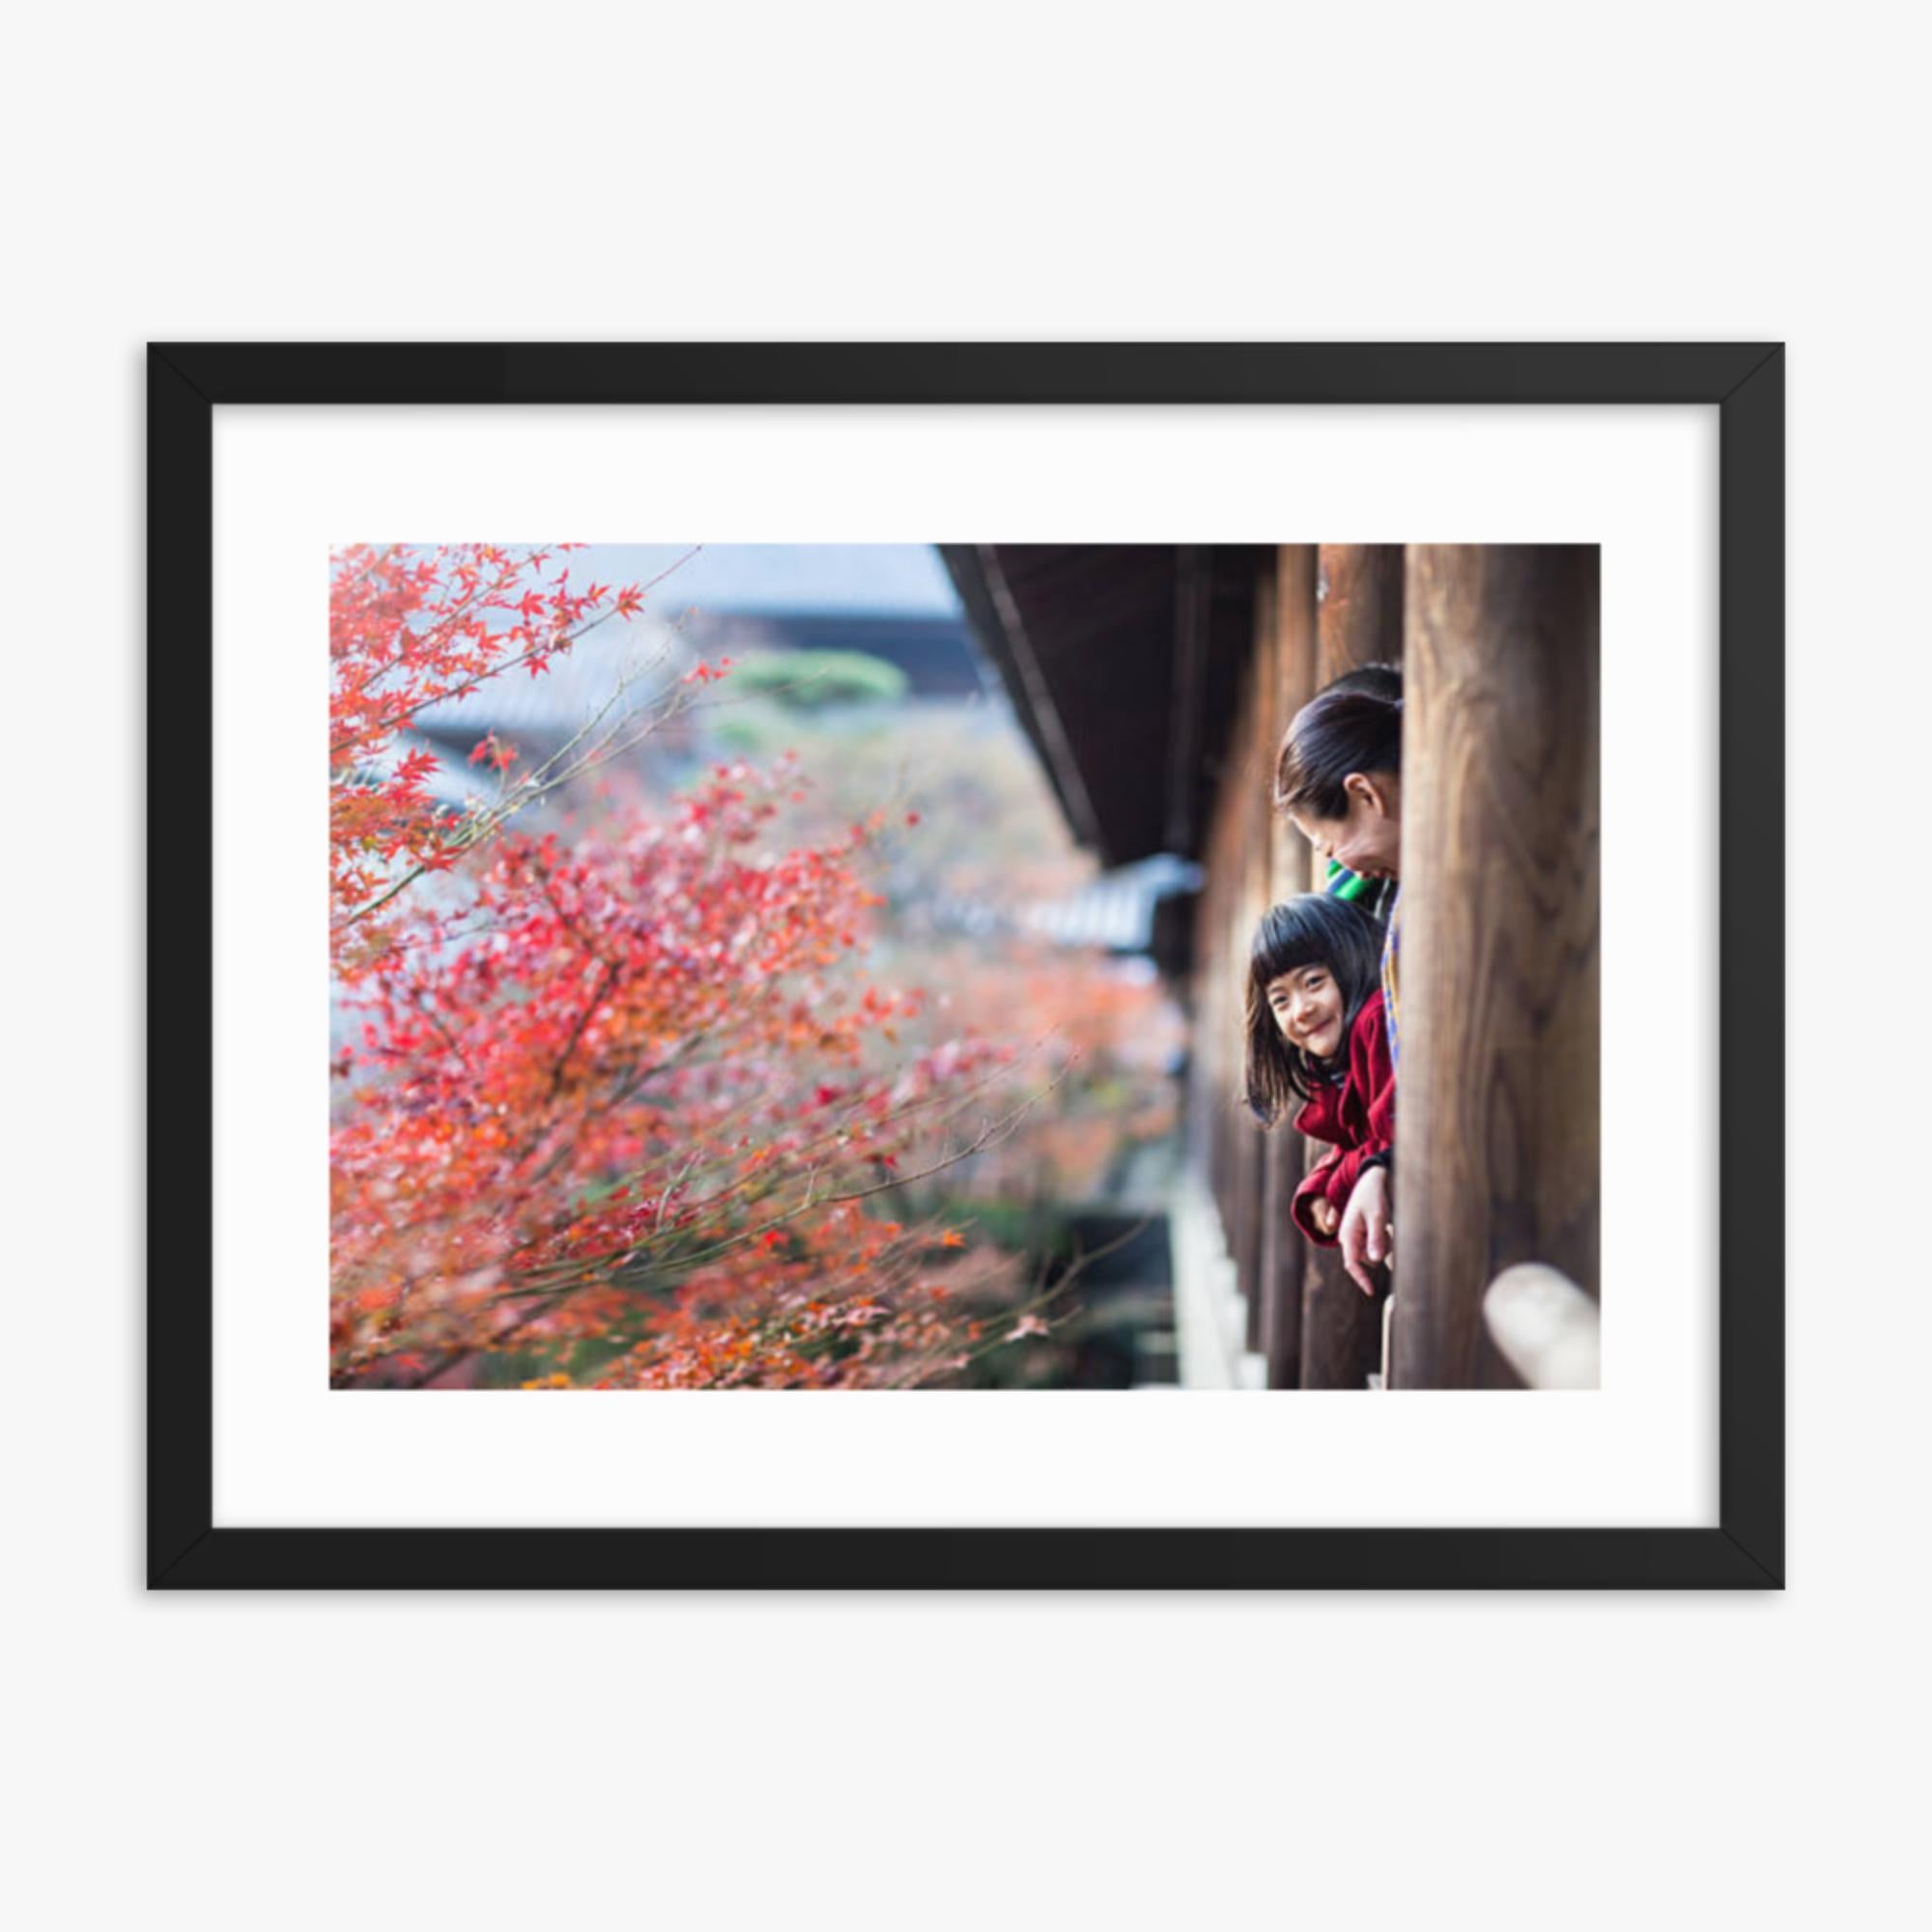 Father, mother and daughter at a temple enjoying autumn leaves 18x24 in Poster With Black Frame